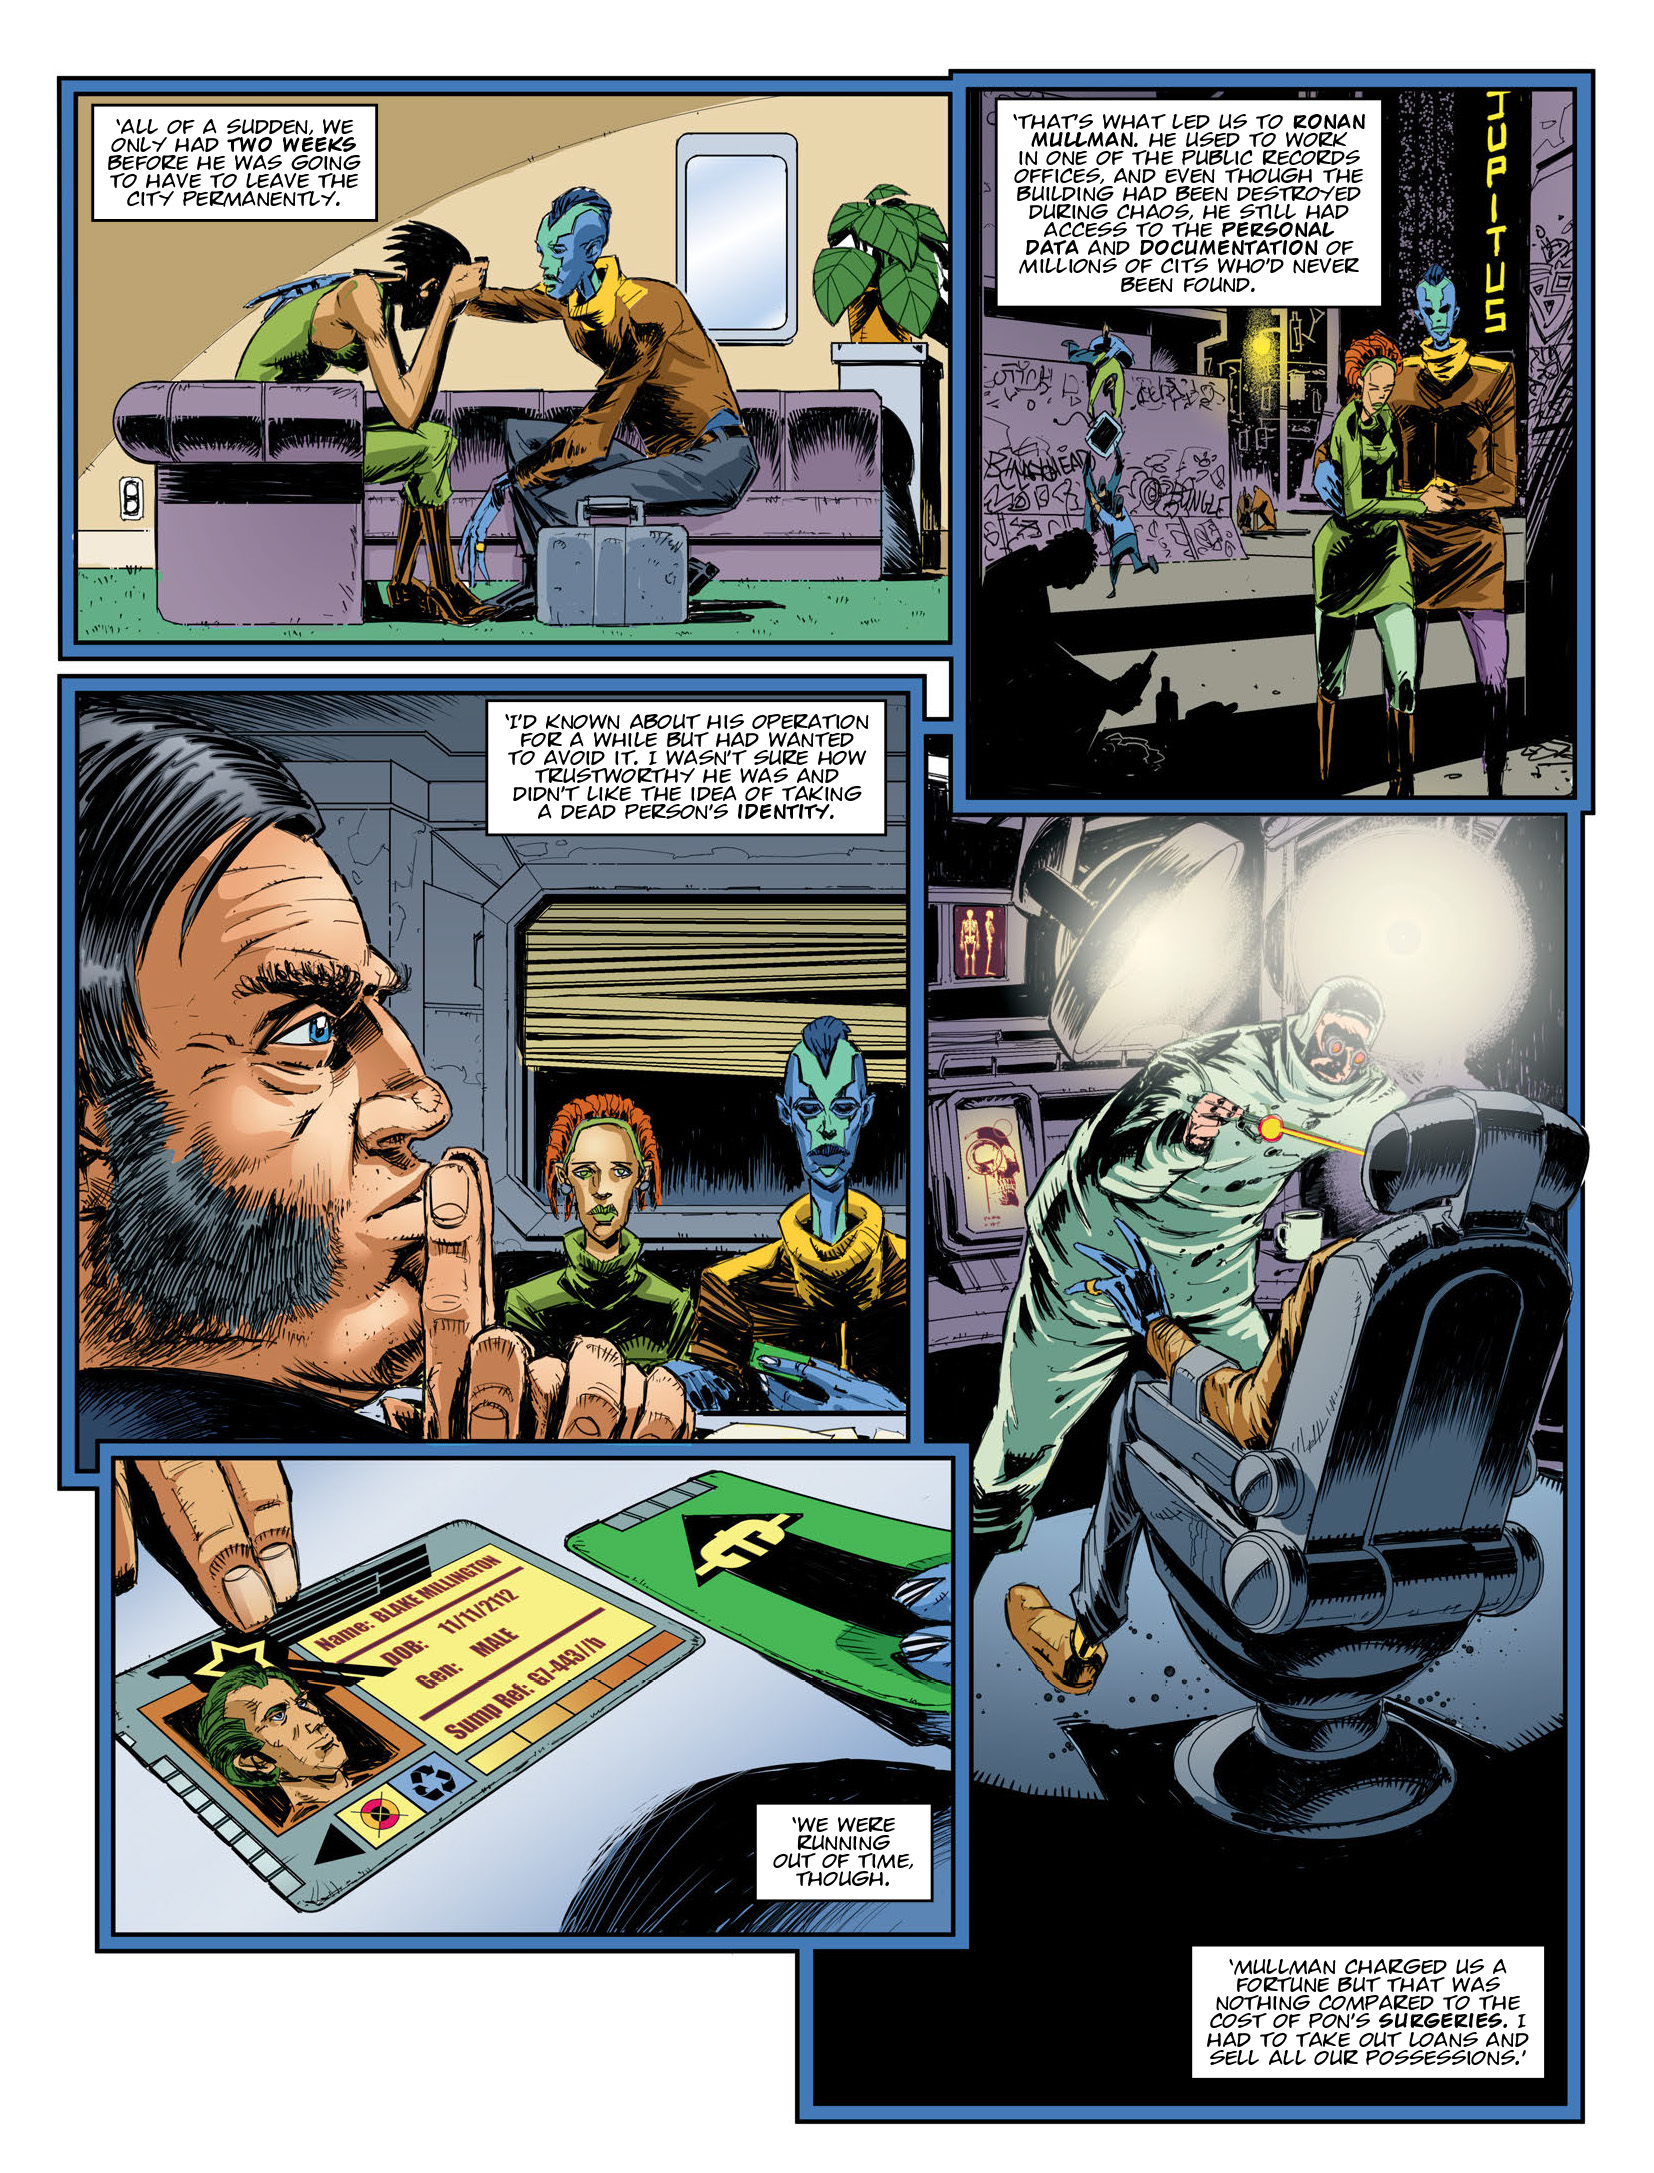 2000 AD: Chapter 2123 - Page 4